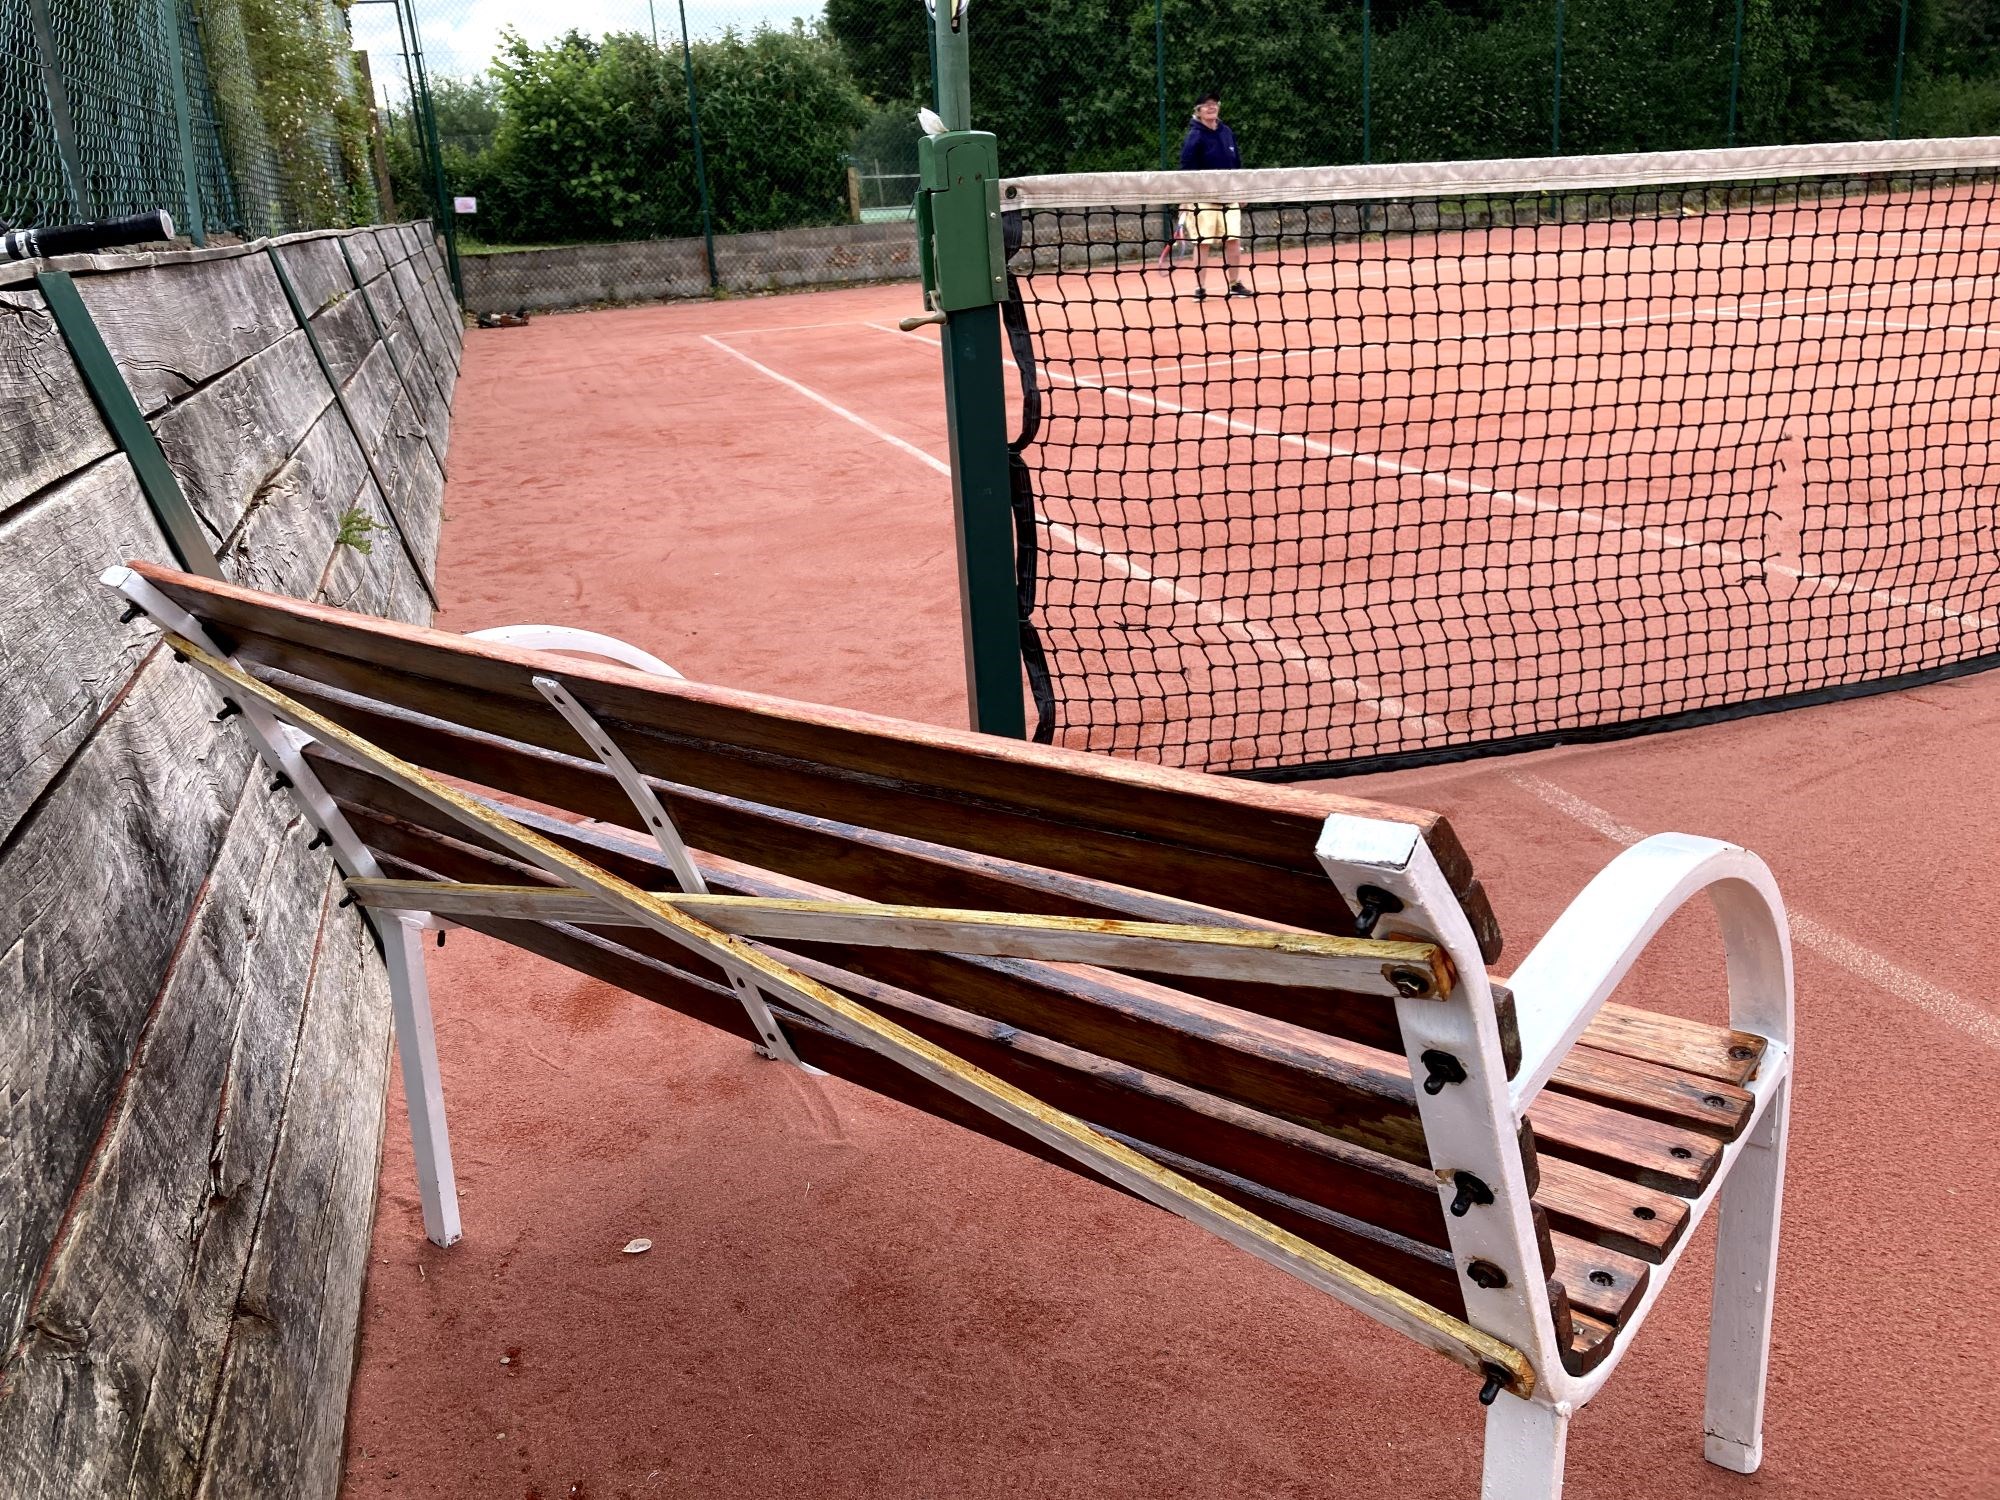 A bench with wooden struts attached diagonally across the back as a repair, situated on the side of a clay tennis court.